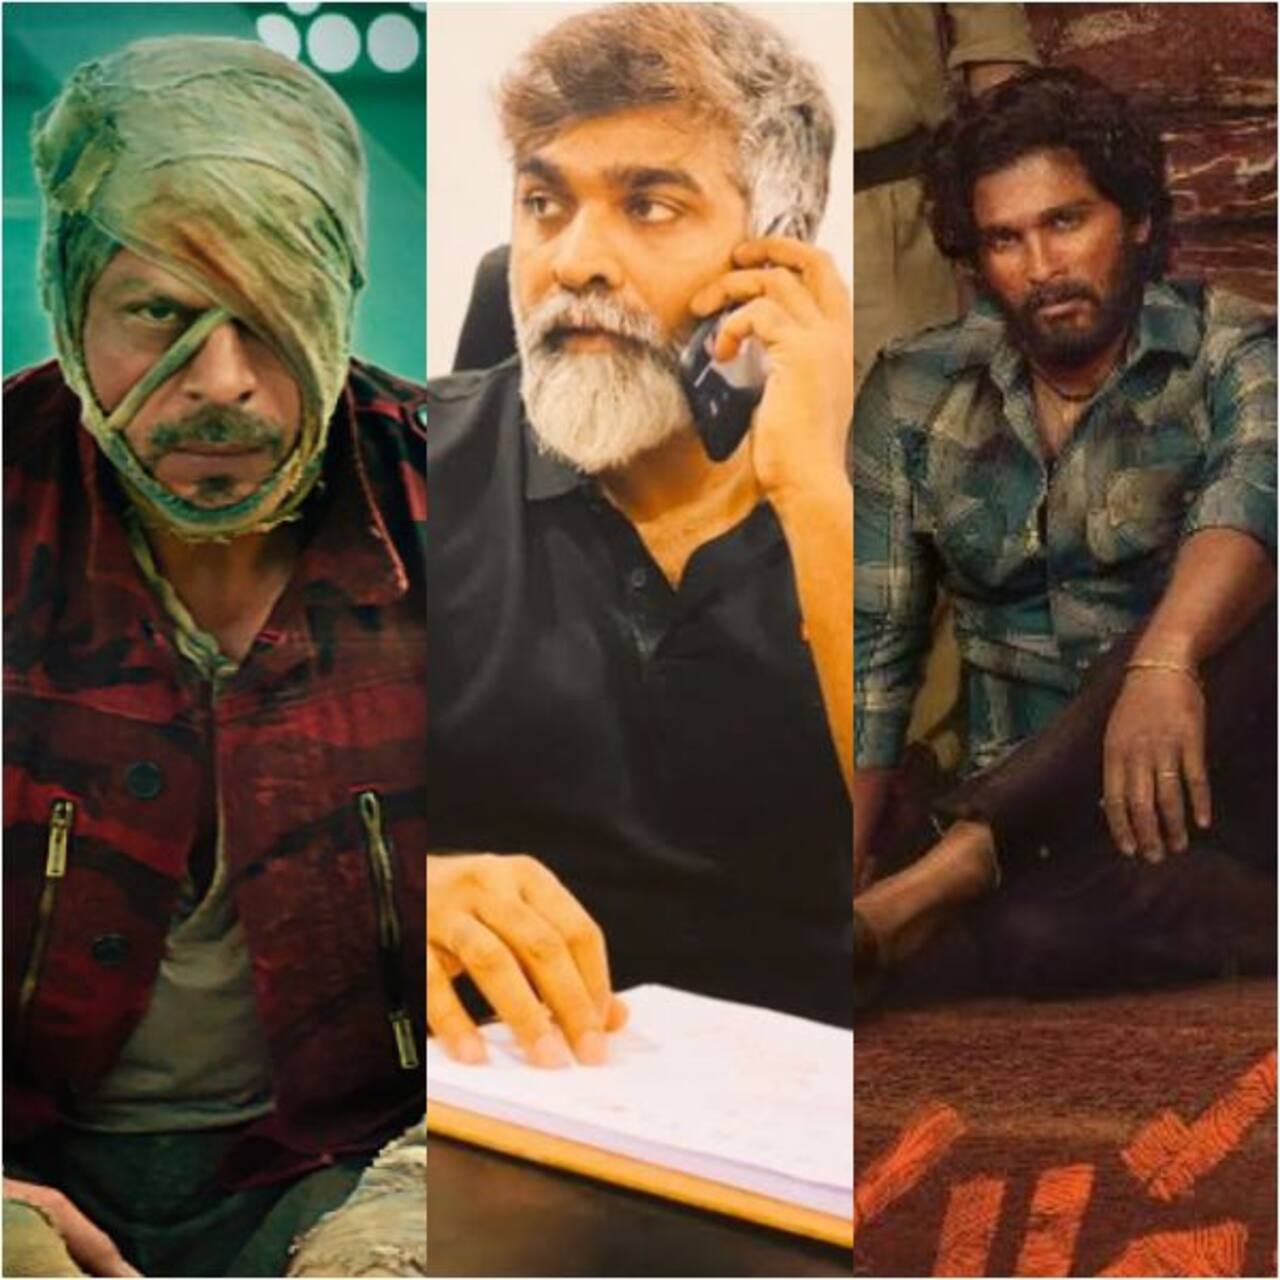 Vijay Sethupathi to play negative role in Shah Rukh Khan’s Jawan but is he also a part of Allu Arjun’s Pushpa 2? Here’s what we know